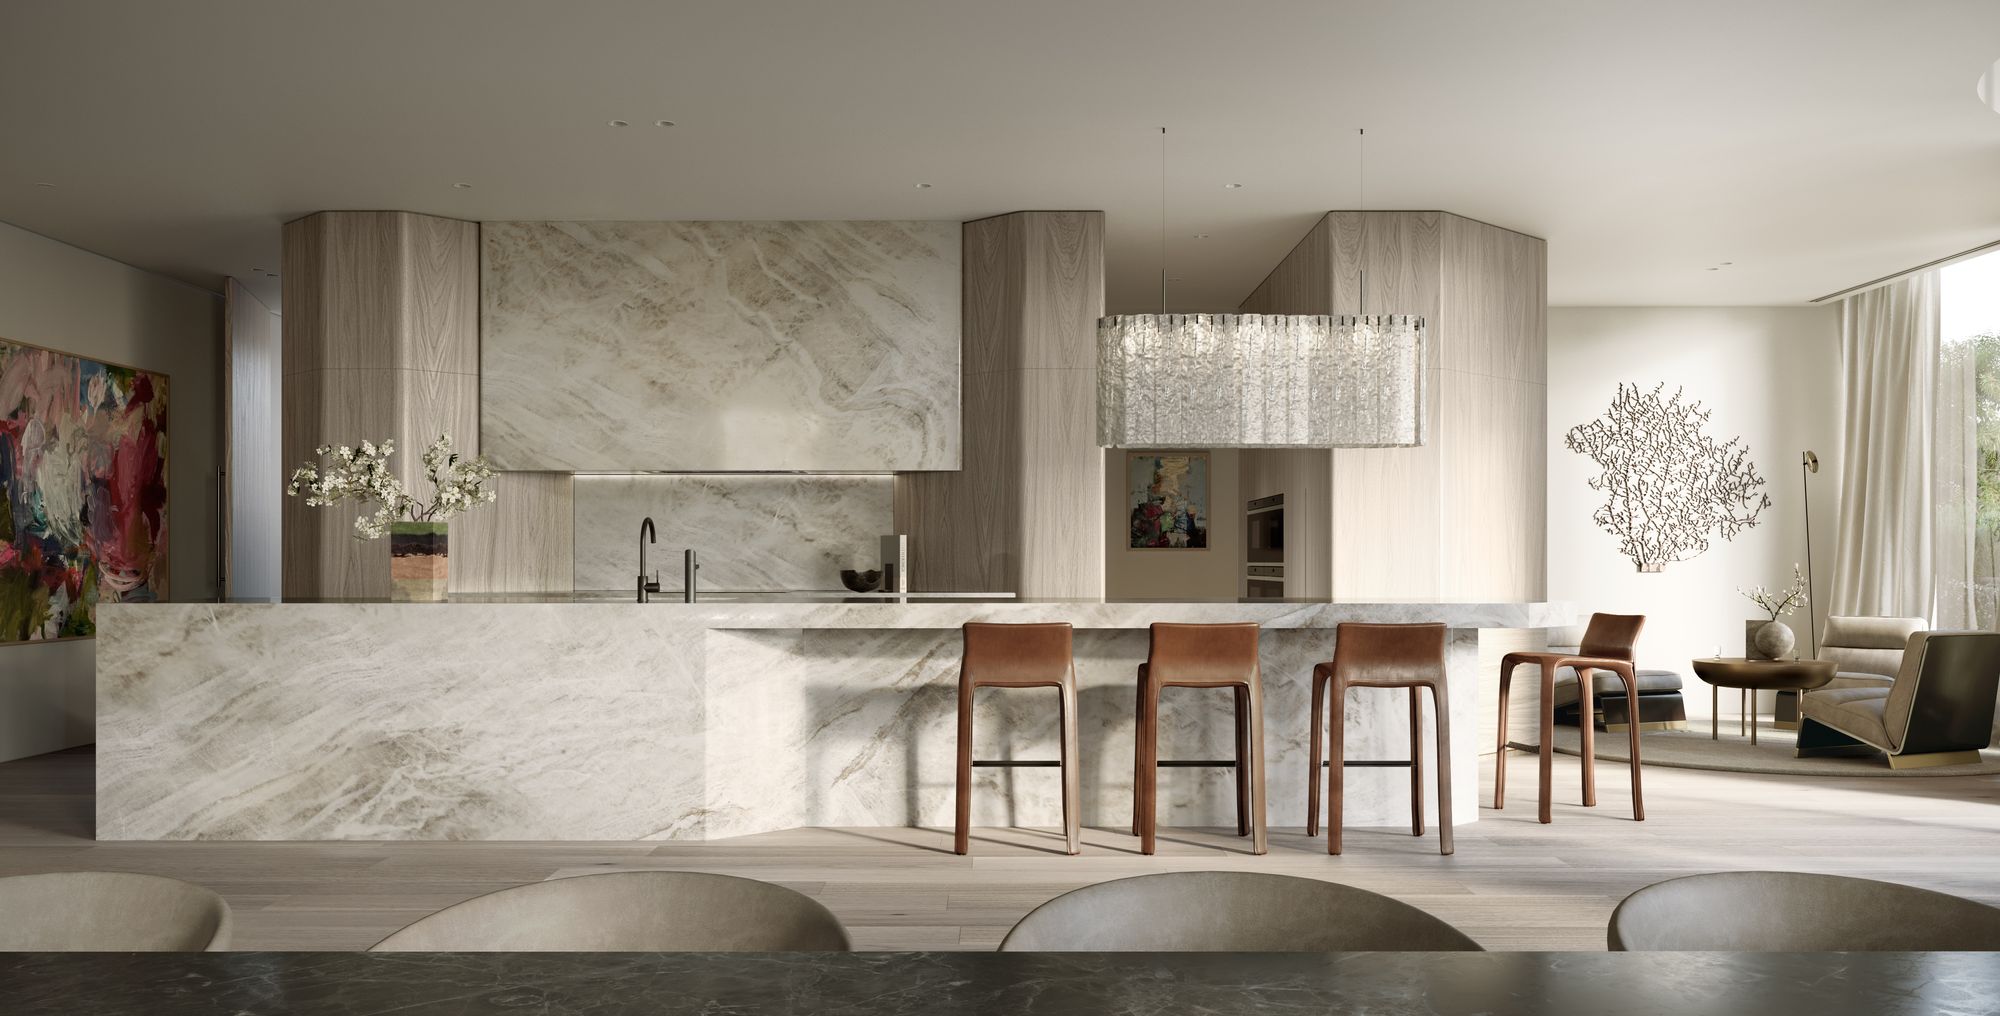 Como Toorak by Prime Edition x Jolson.displays a luxurious, modern kitchen interior with an open plan, blending effortlessly into a living area. The kitchen features a marble island and backsplash that provide a sleek and sophisticated look. The warm wood tones of the cabinetry contrast elegantly with the cool marble, creating a balanced aesthetic.